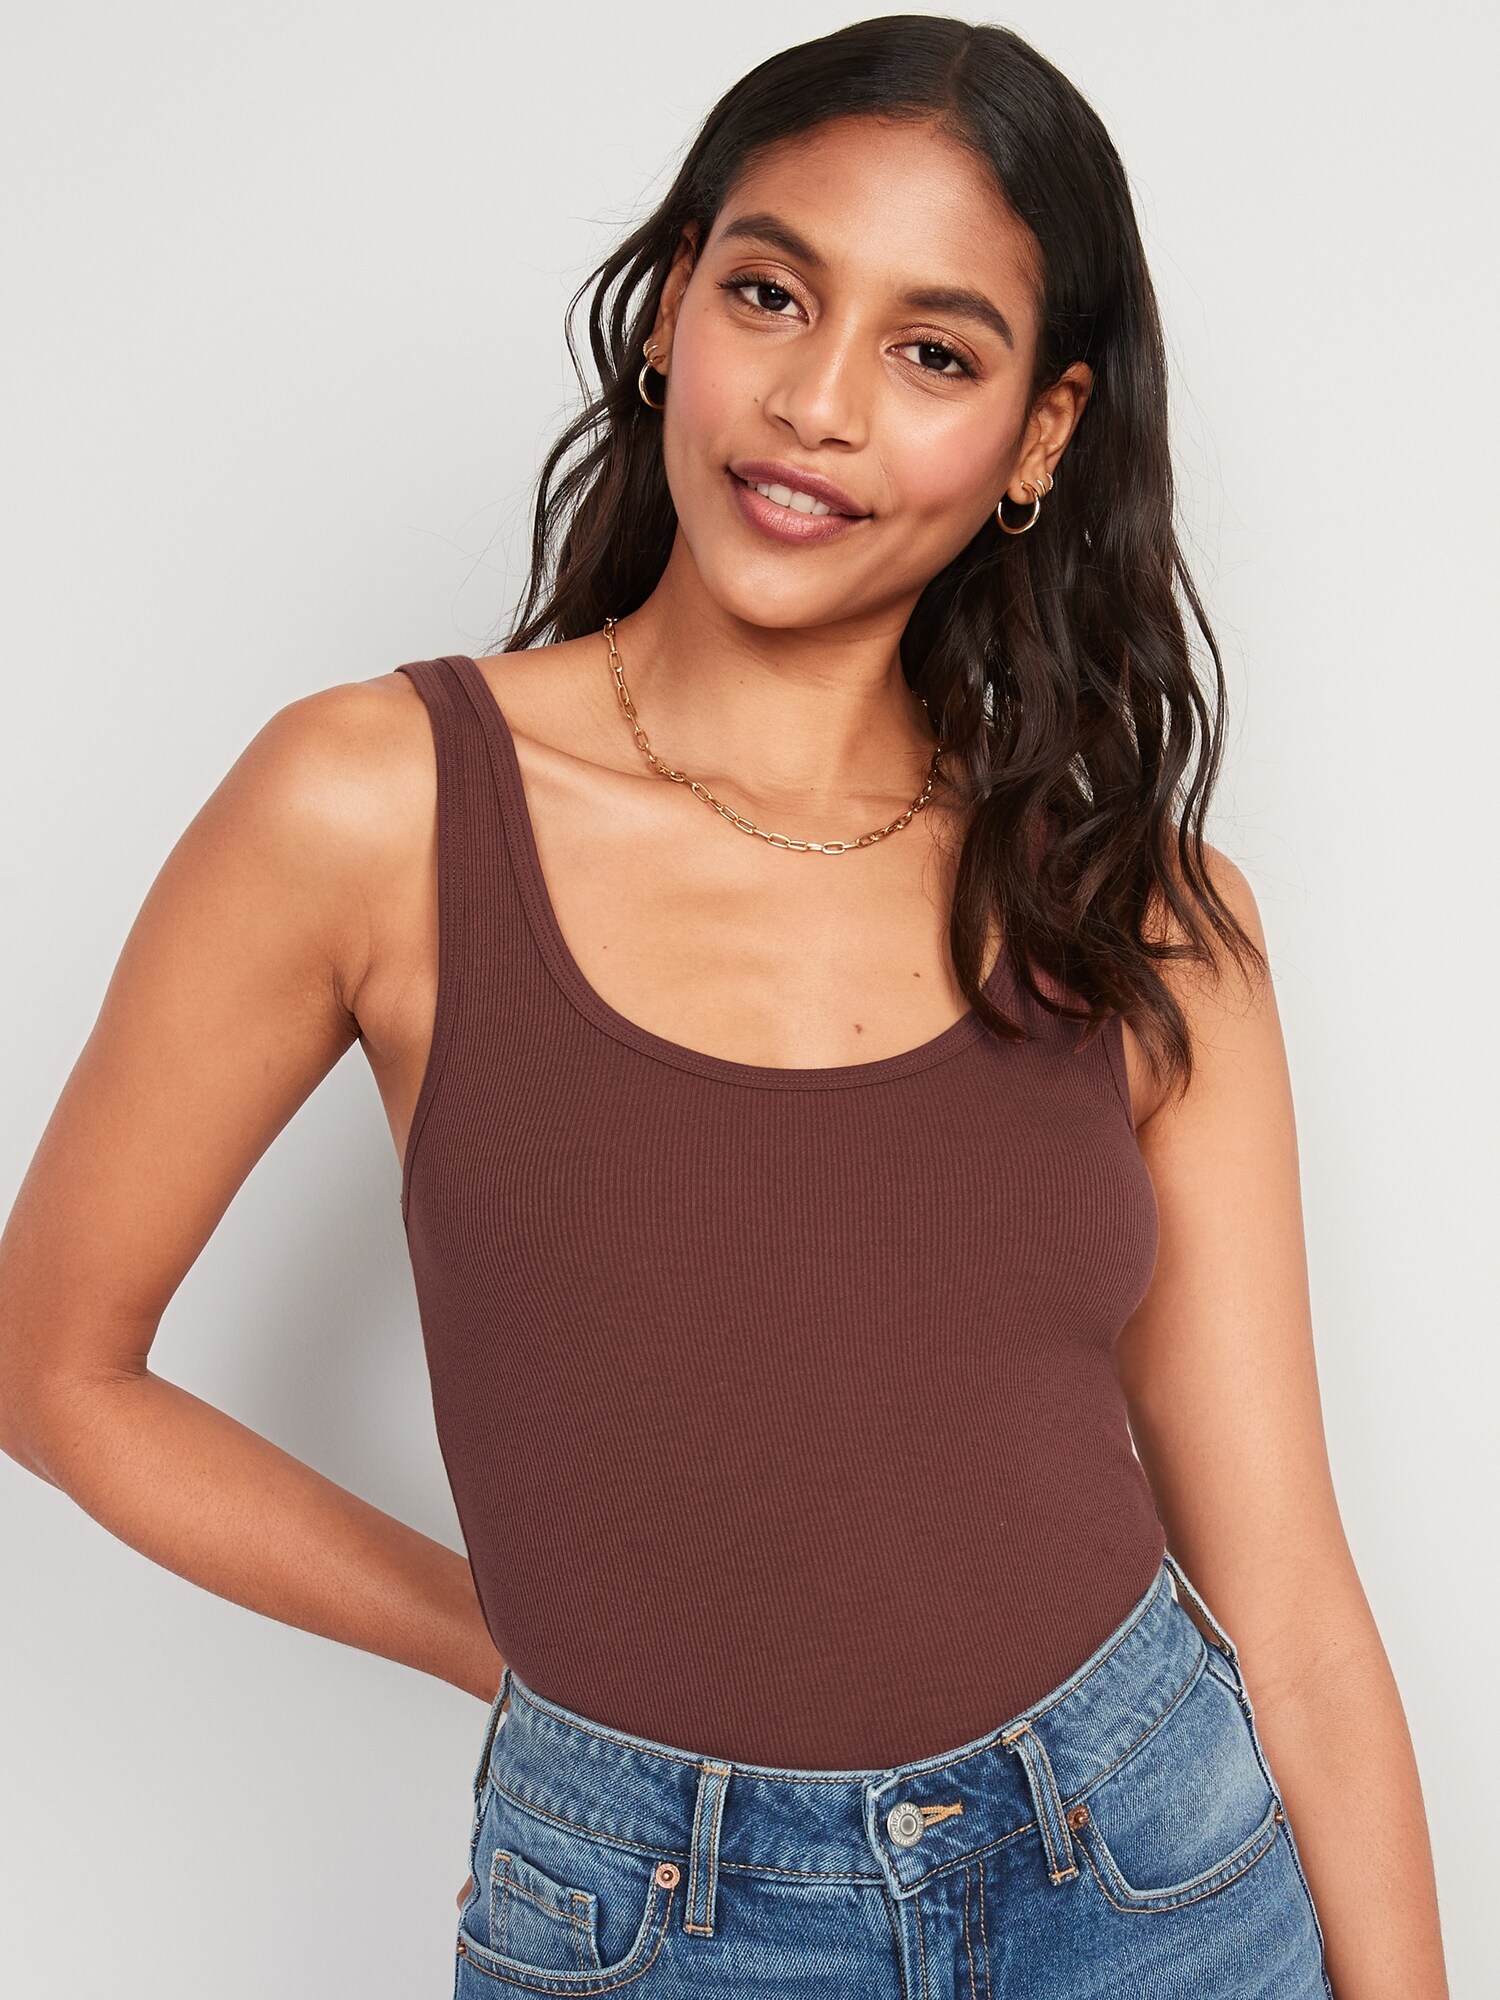 Scoop Neck Rib Knit First Layer Tank Top For Women Old Navy 